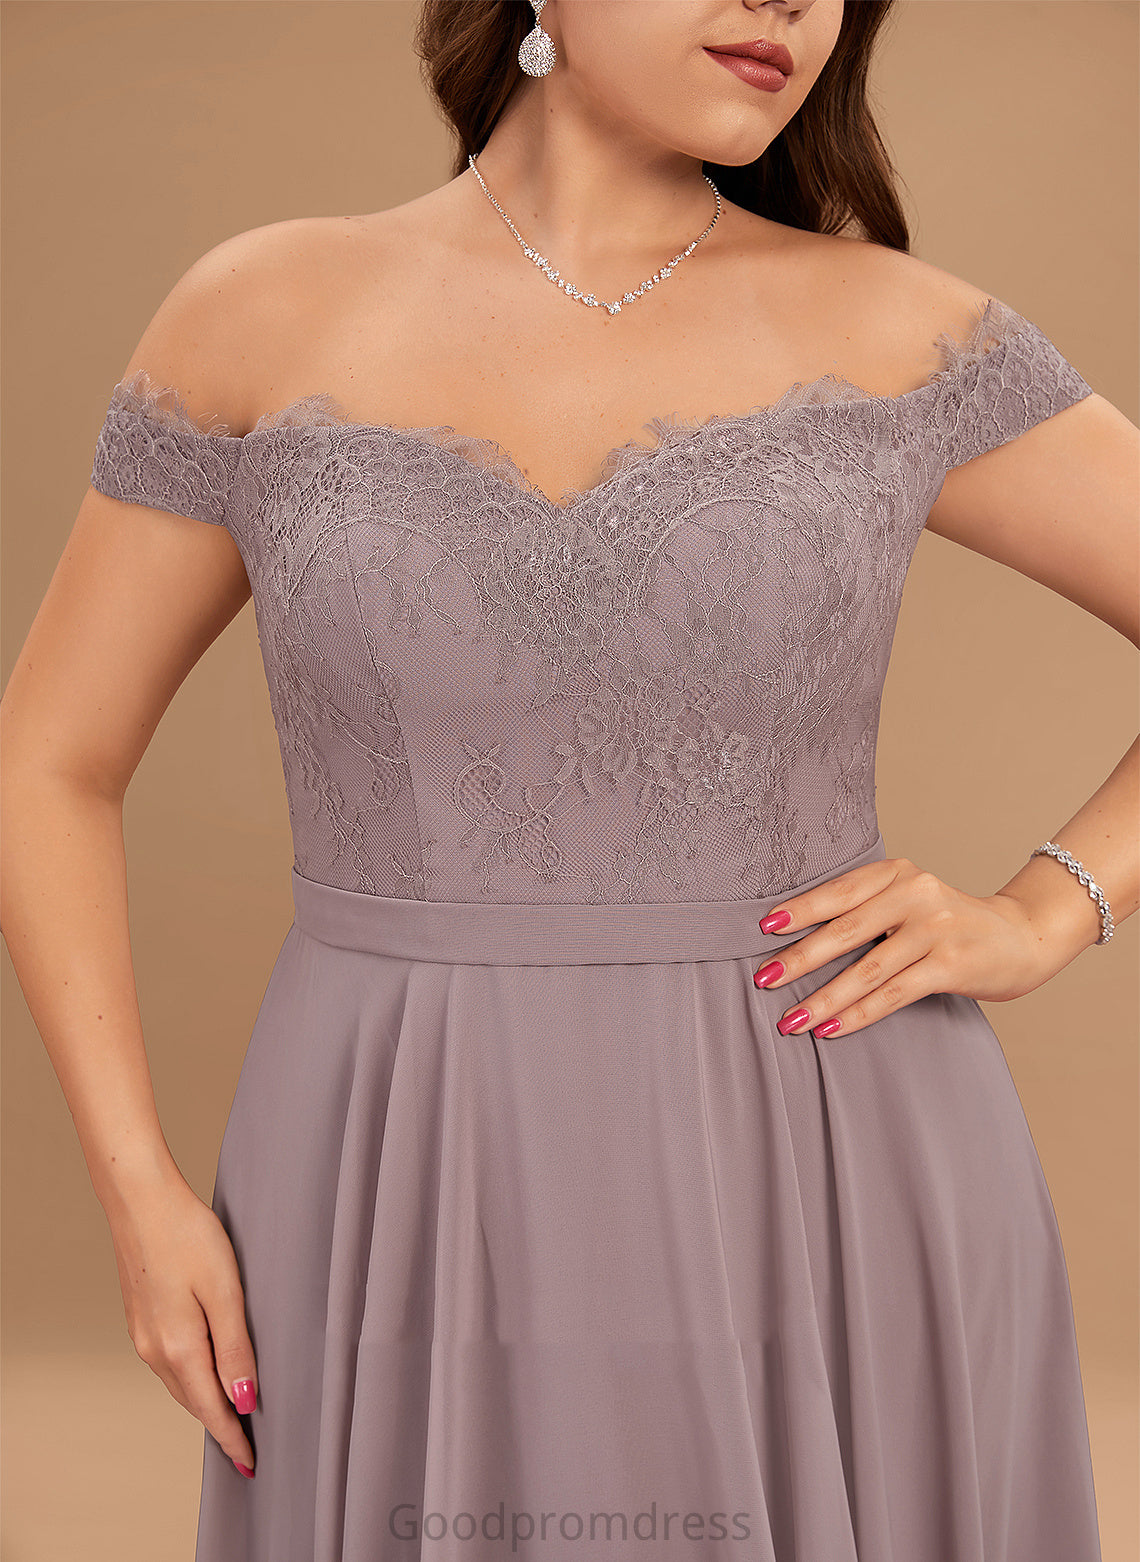 Homecoming Beading Lace With Dress Ellen Homecoming Dresses Tea-Length Chiffon Off-the-Shoulder A-Line